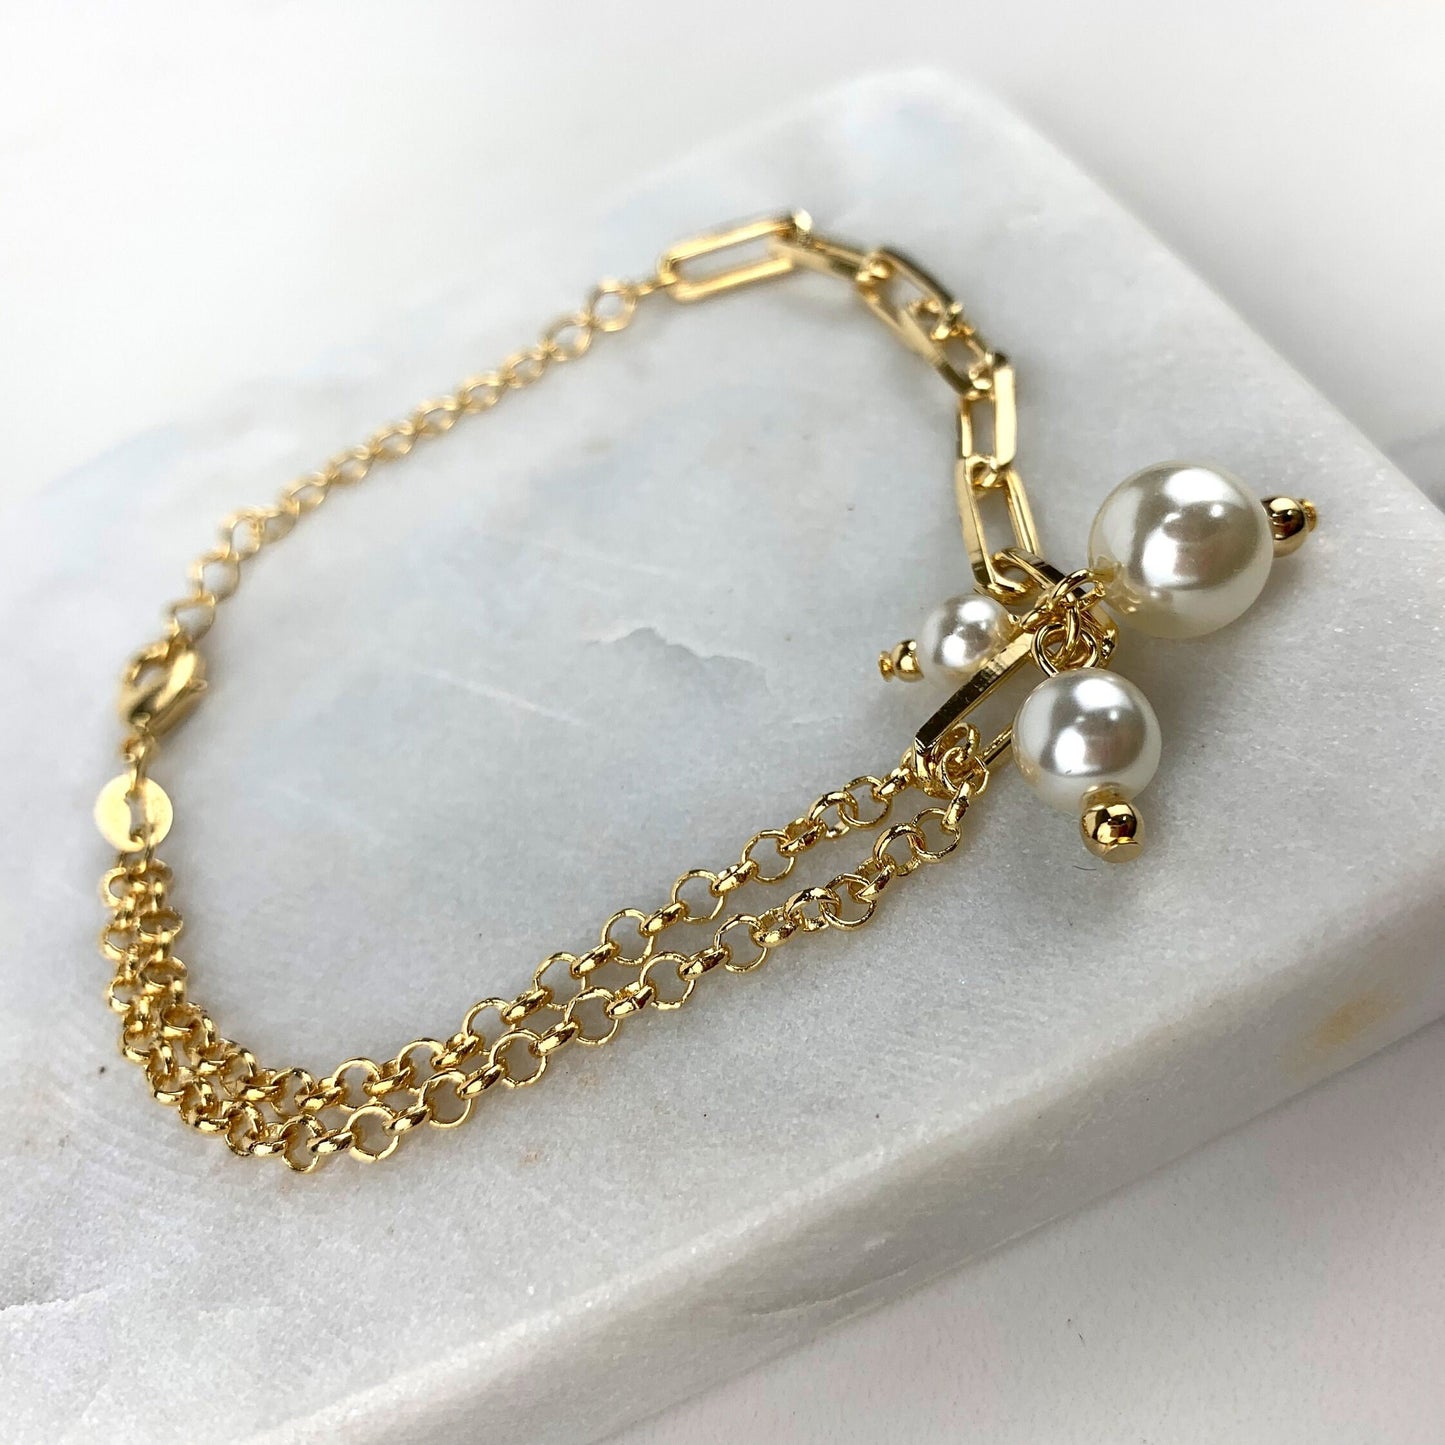 18k Gold Filled Bracelet or Necklace with Paper Clip Chain, Rolo Link Chain, Three White Plastic Simulated Pearls Wholesale Jewelry Supplies